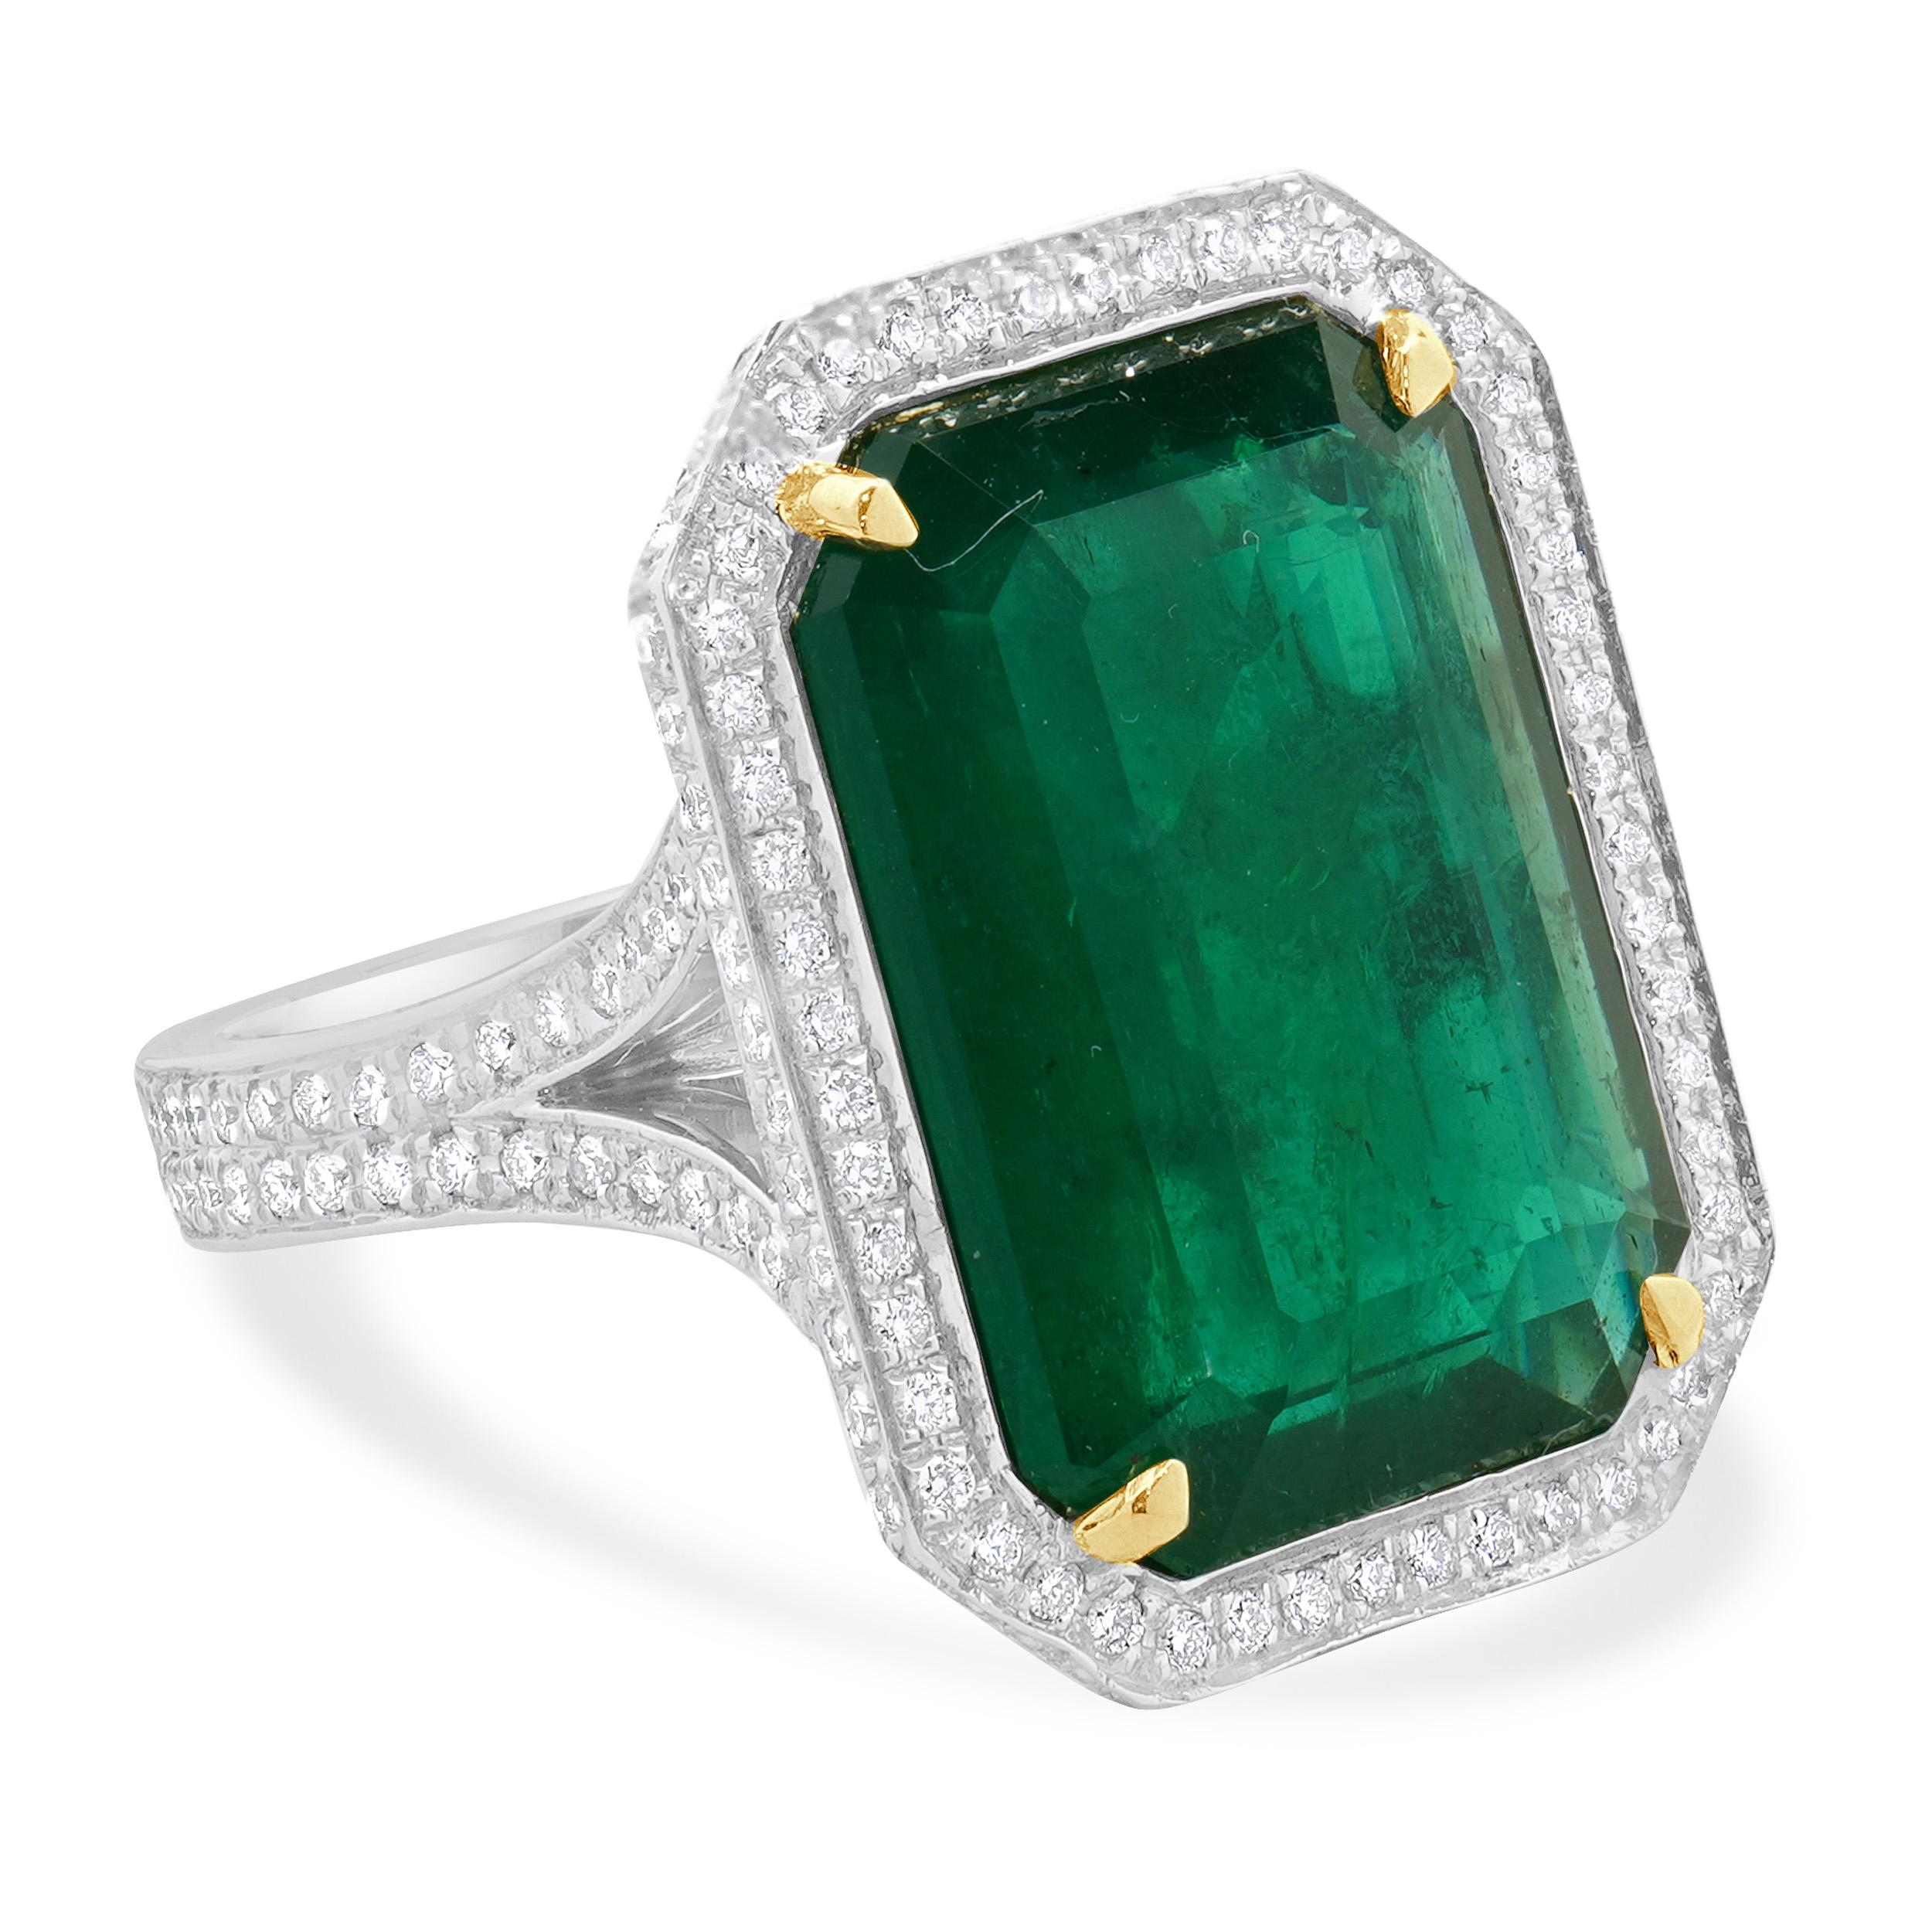 18 Karat White Gold Emerald and Diamond Cocktail Ring In Excellent Condition For Sale In Scottsdale, AZ